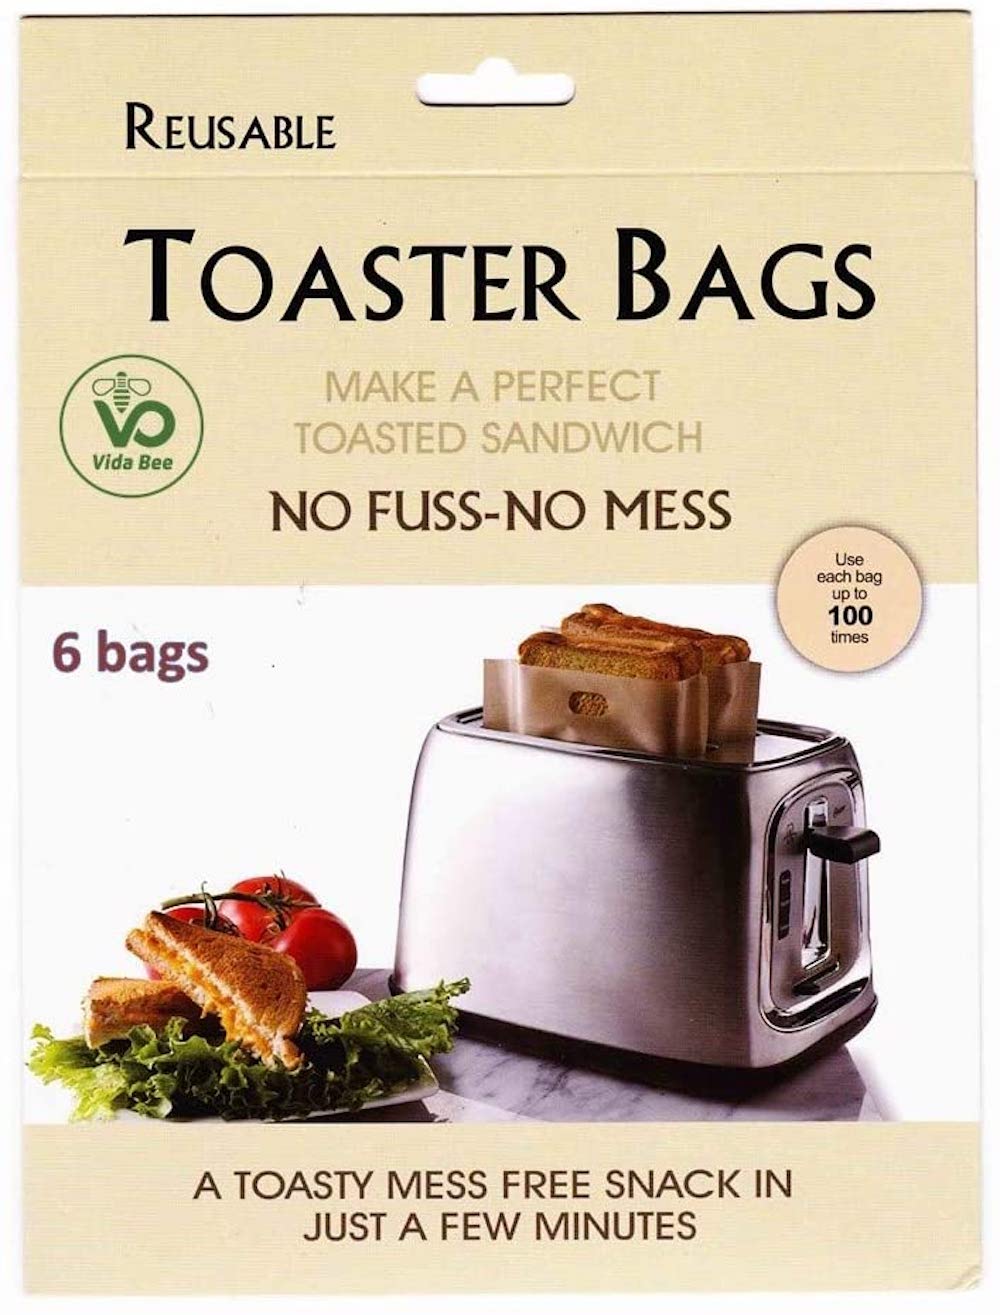 Toaster bags. 